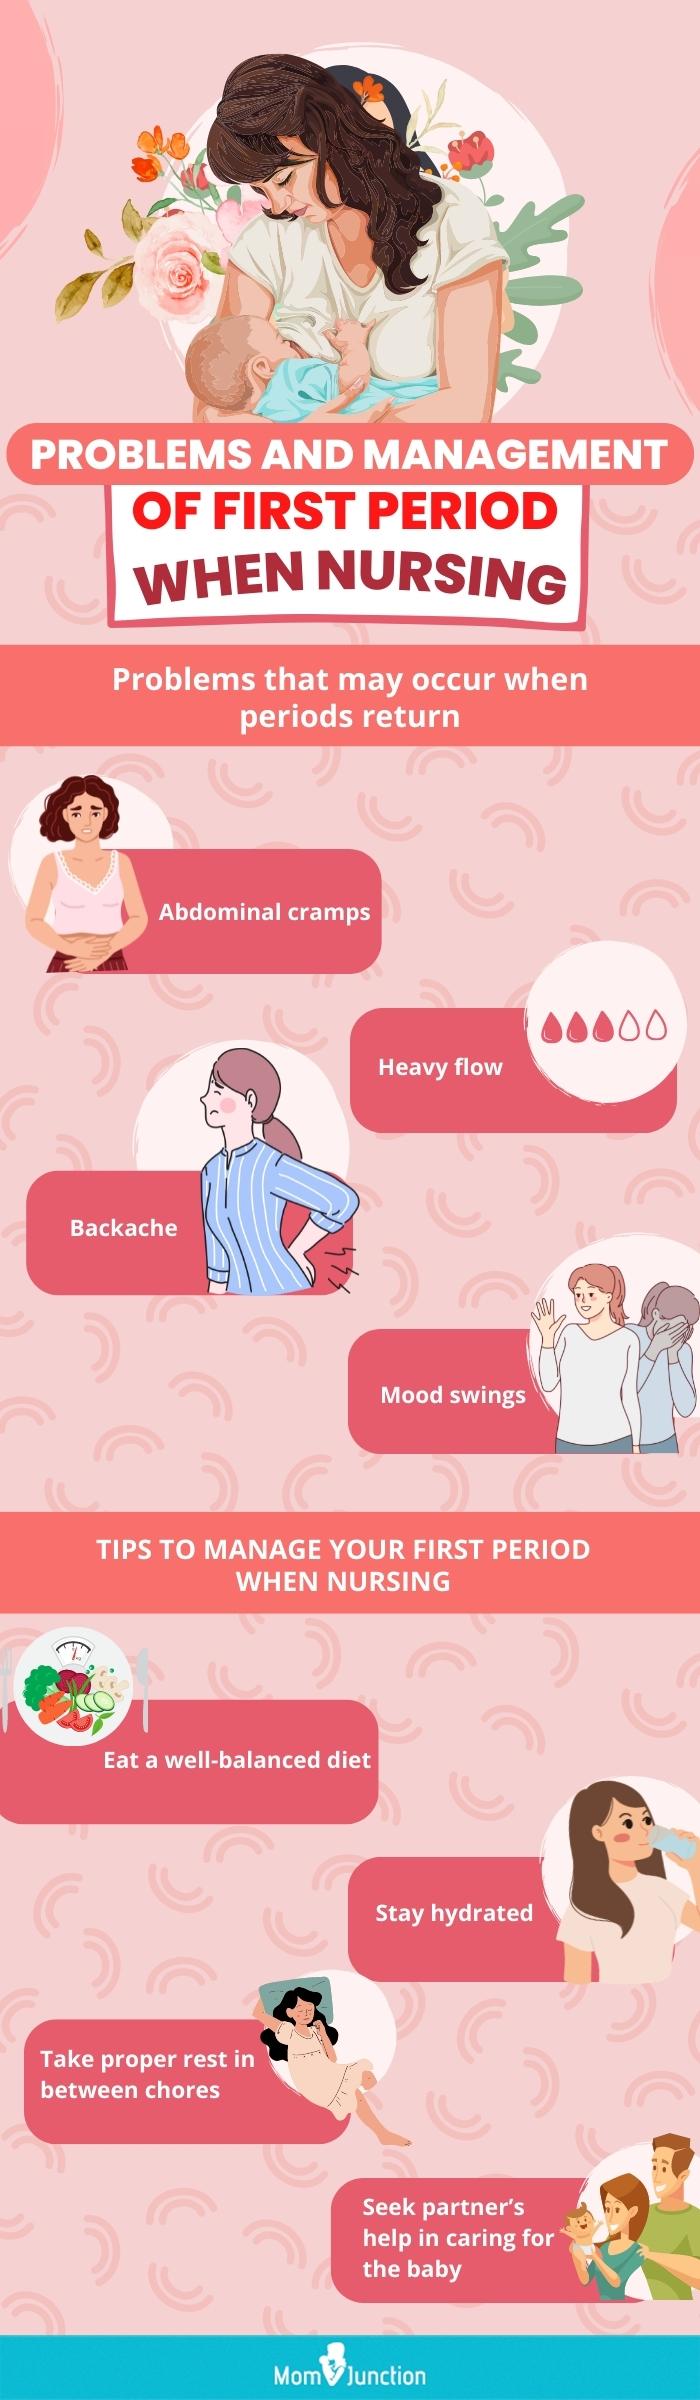 problems and management of first period when Nursing (infographic)